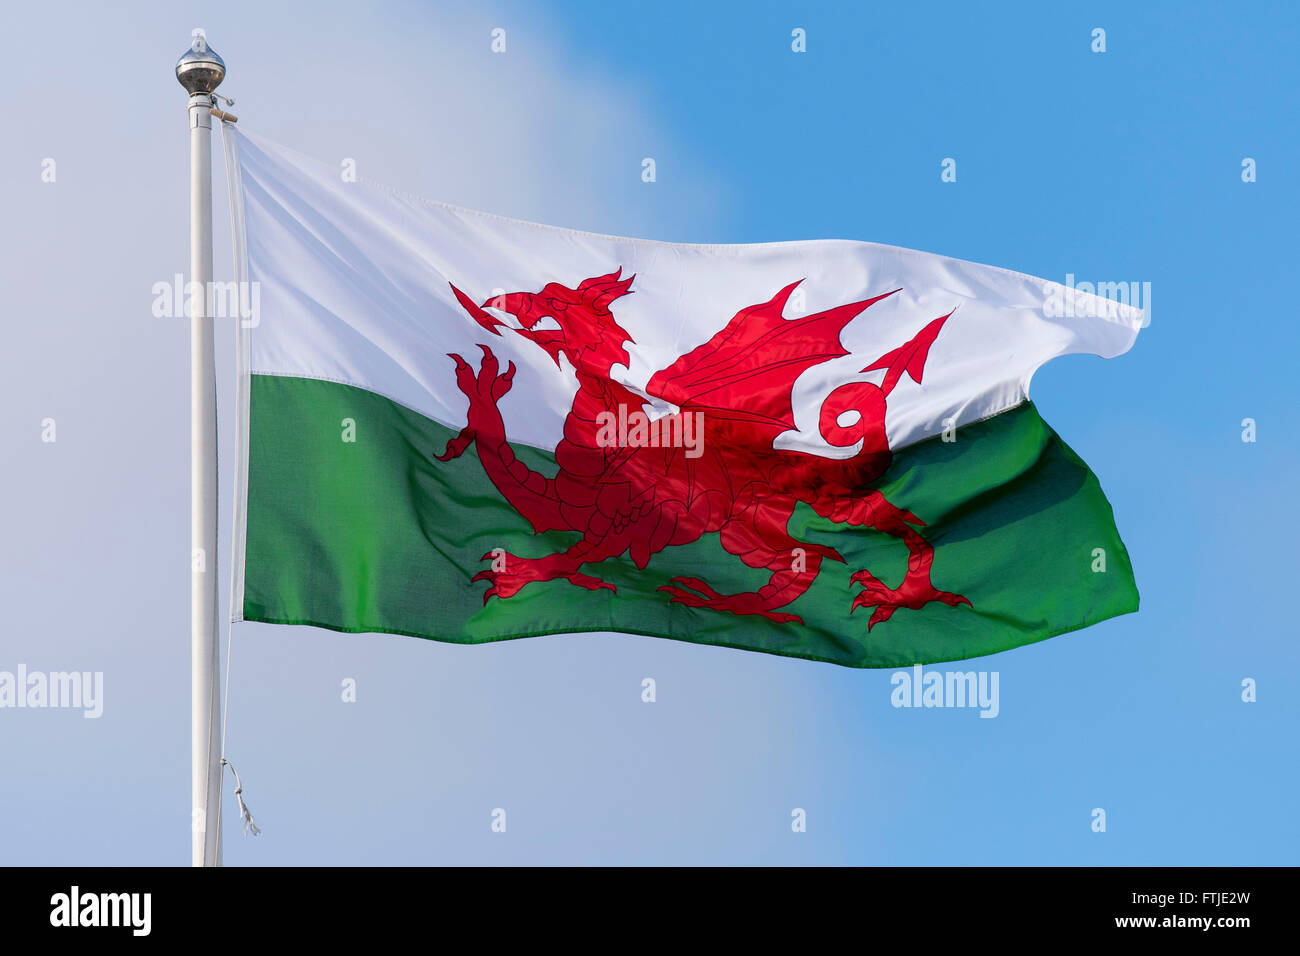 Wales showing dragon flag blowing in the wind on a sunny day. Stock Photo